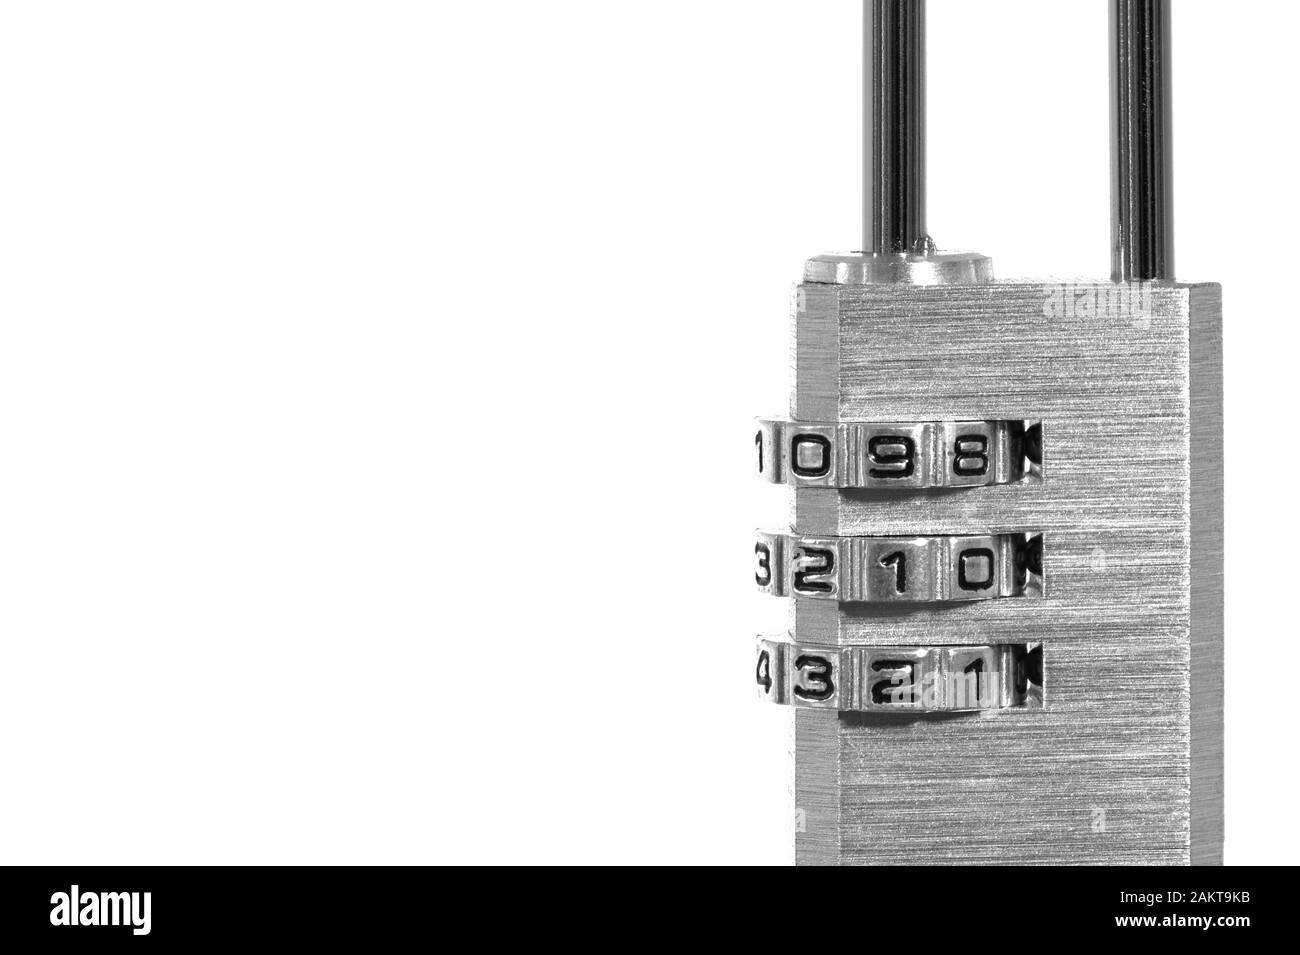 Combination padlock with digit rolls. Safety lock in black and white, monochrome style with copy space. Concept for security and safety. Stock Photo